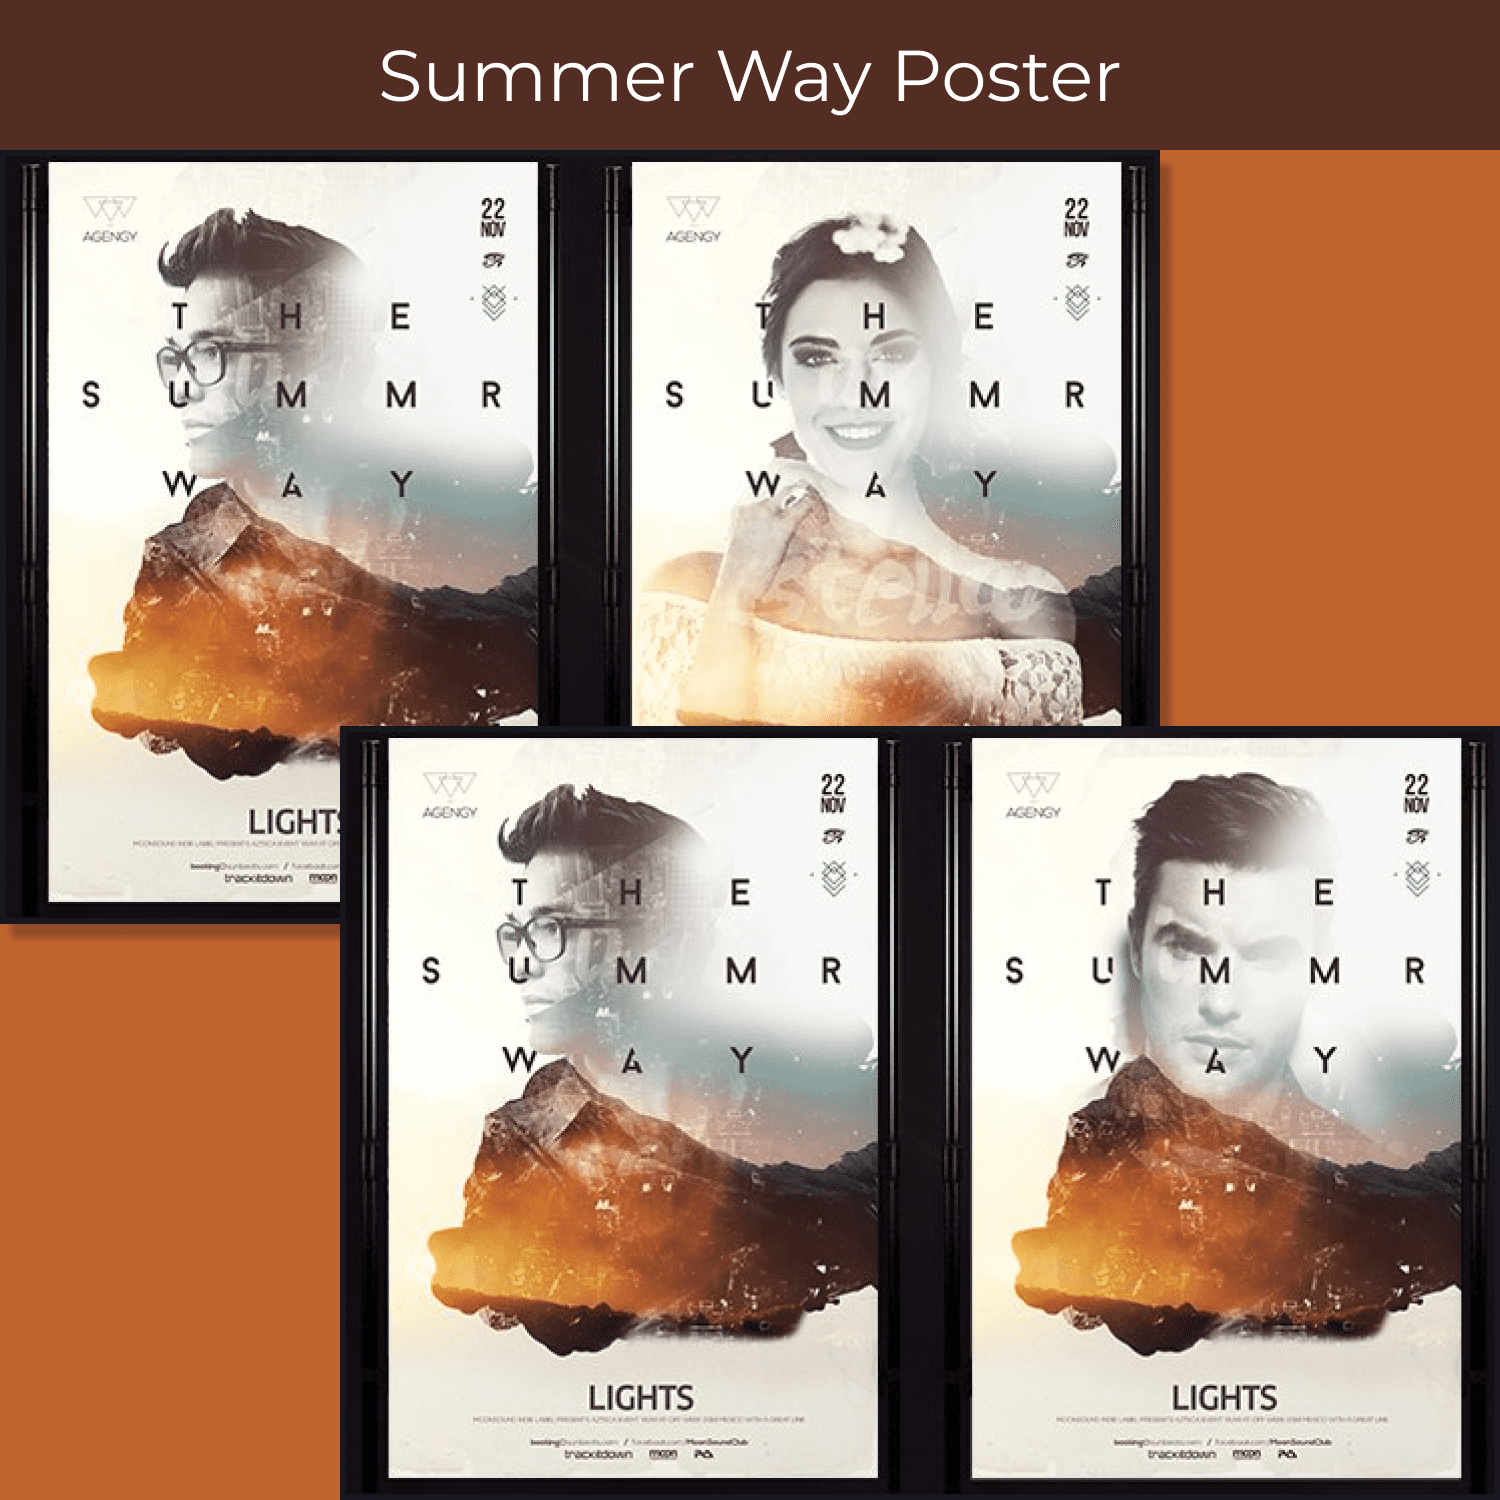 Summer Way Poster cover image.